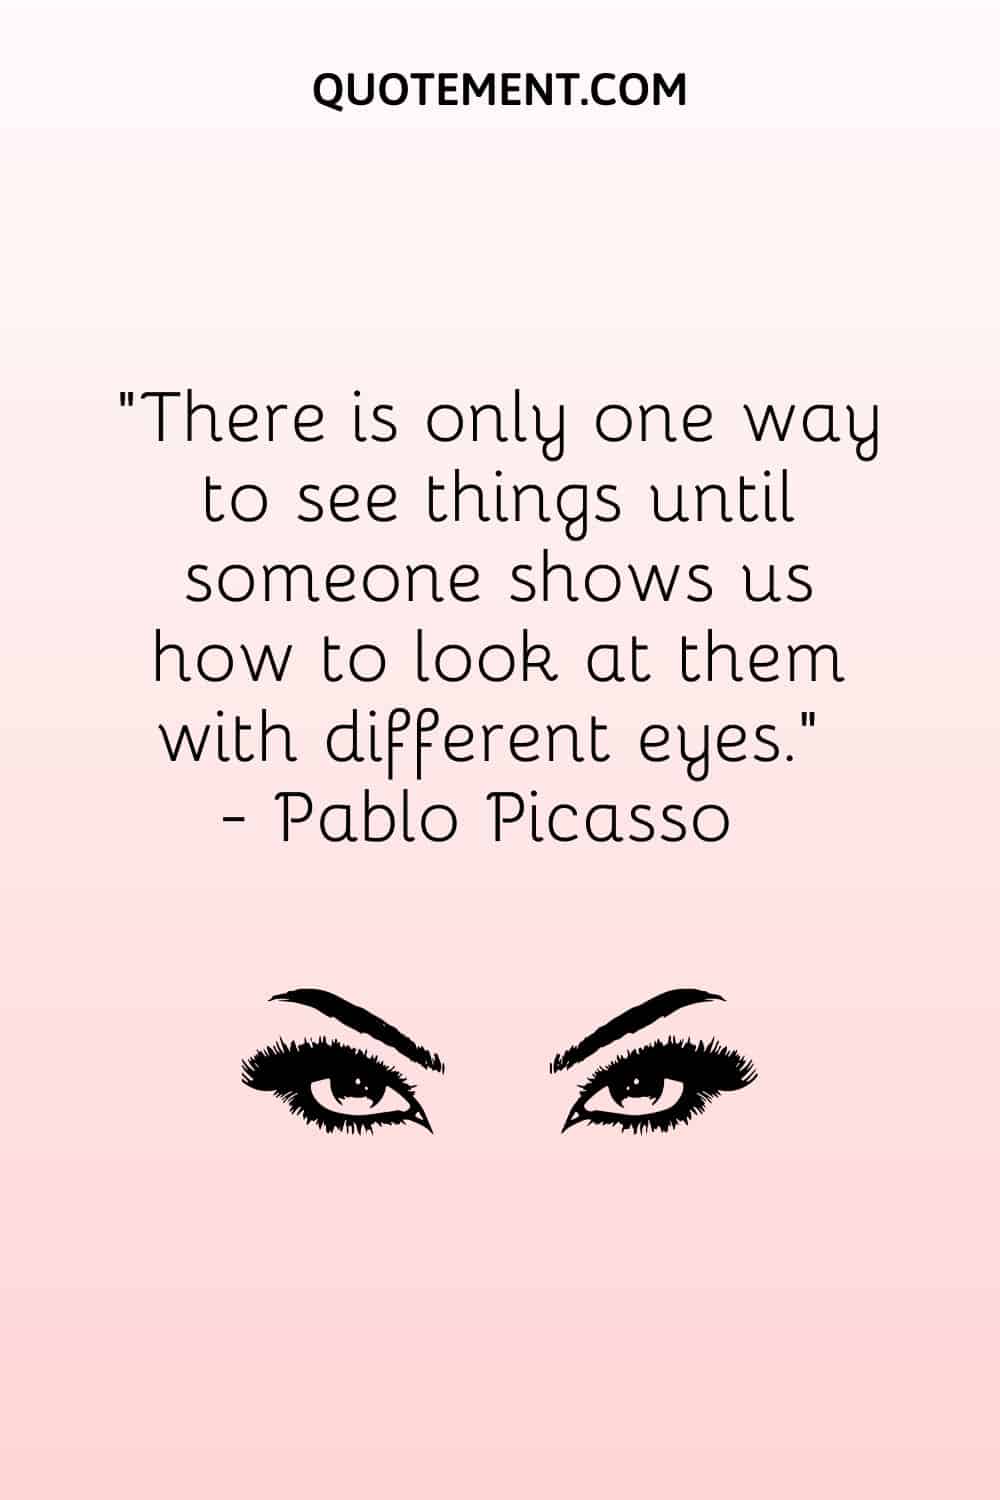 There is only one way to see things until someone shows us how to look at them with different eyes